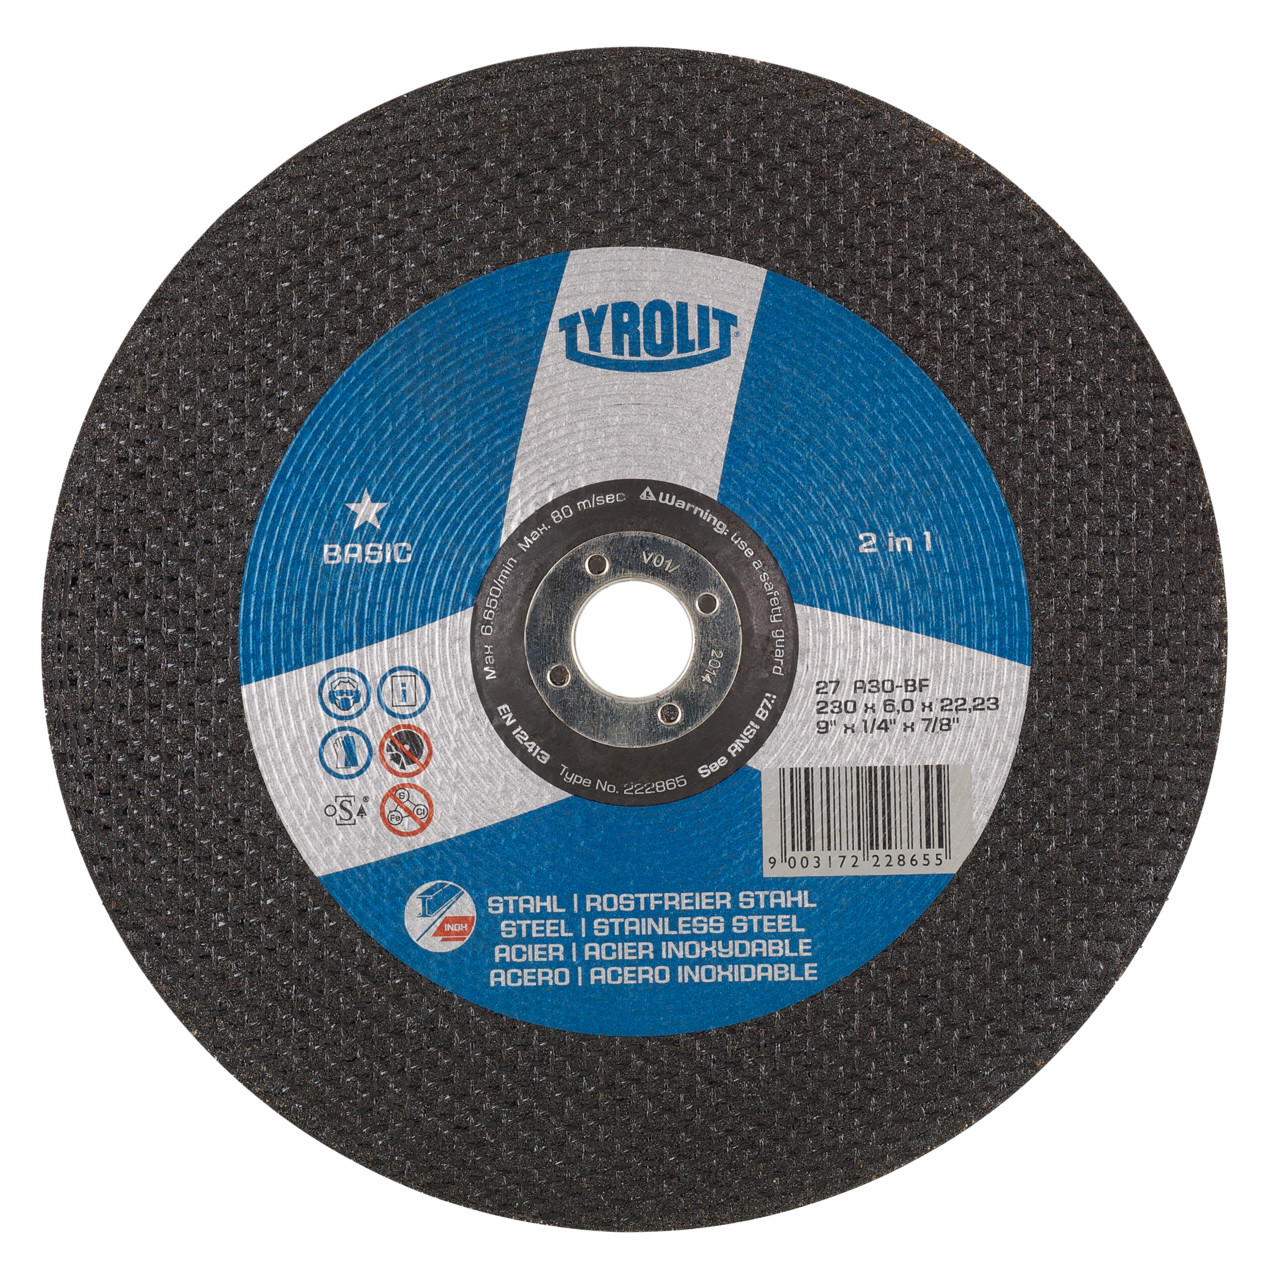 TYROLIT grinding wheel DxUxH 150x4x22.23 2in1 for steel and stainless steel, shape: 27 - offset version, Art. 34176633